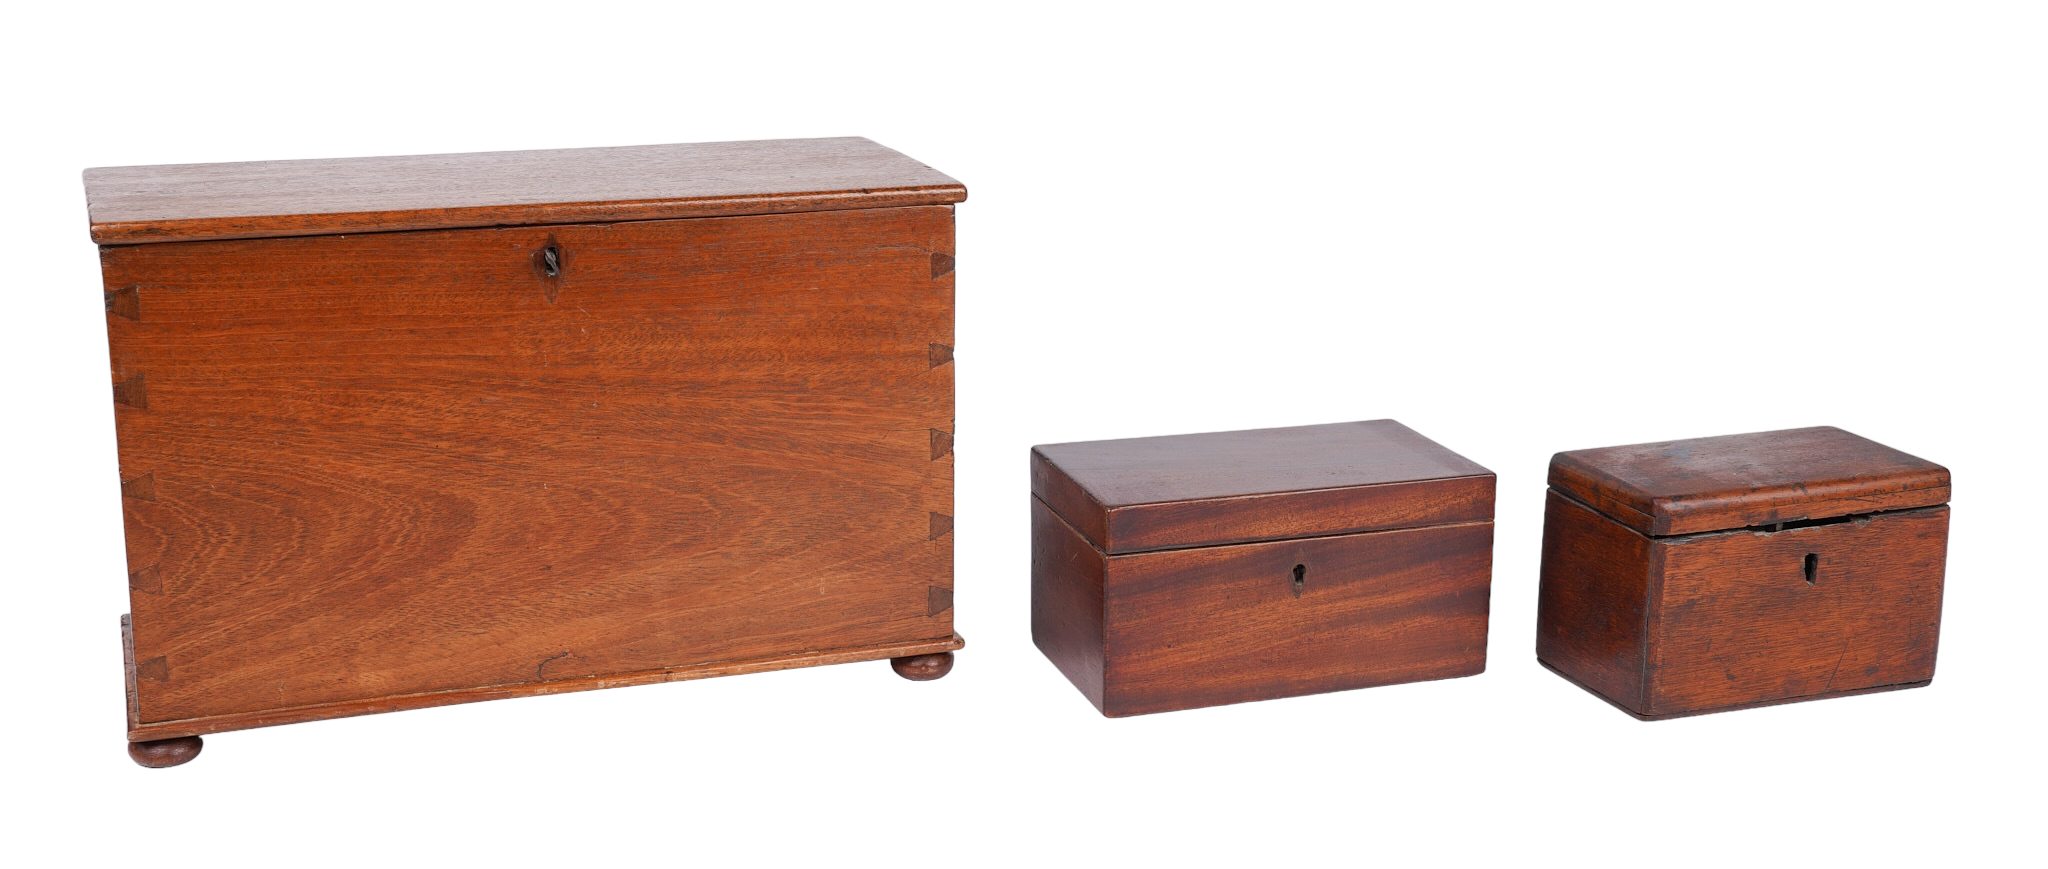  3 Miniature chests and boxes 2e2119